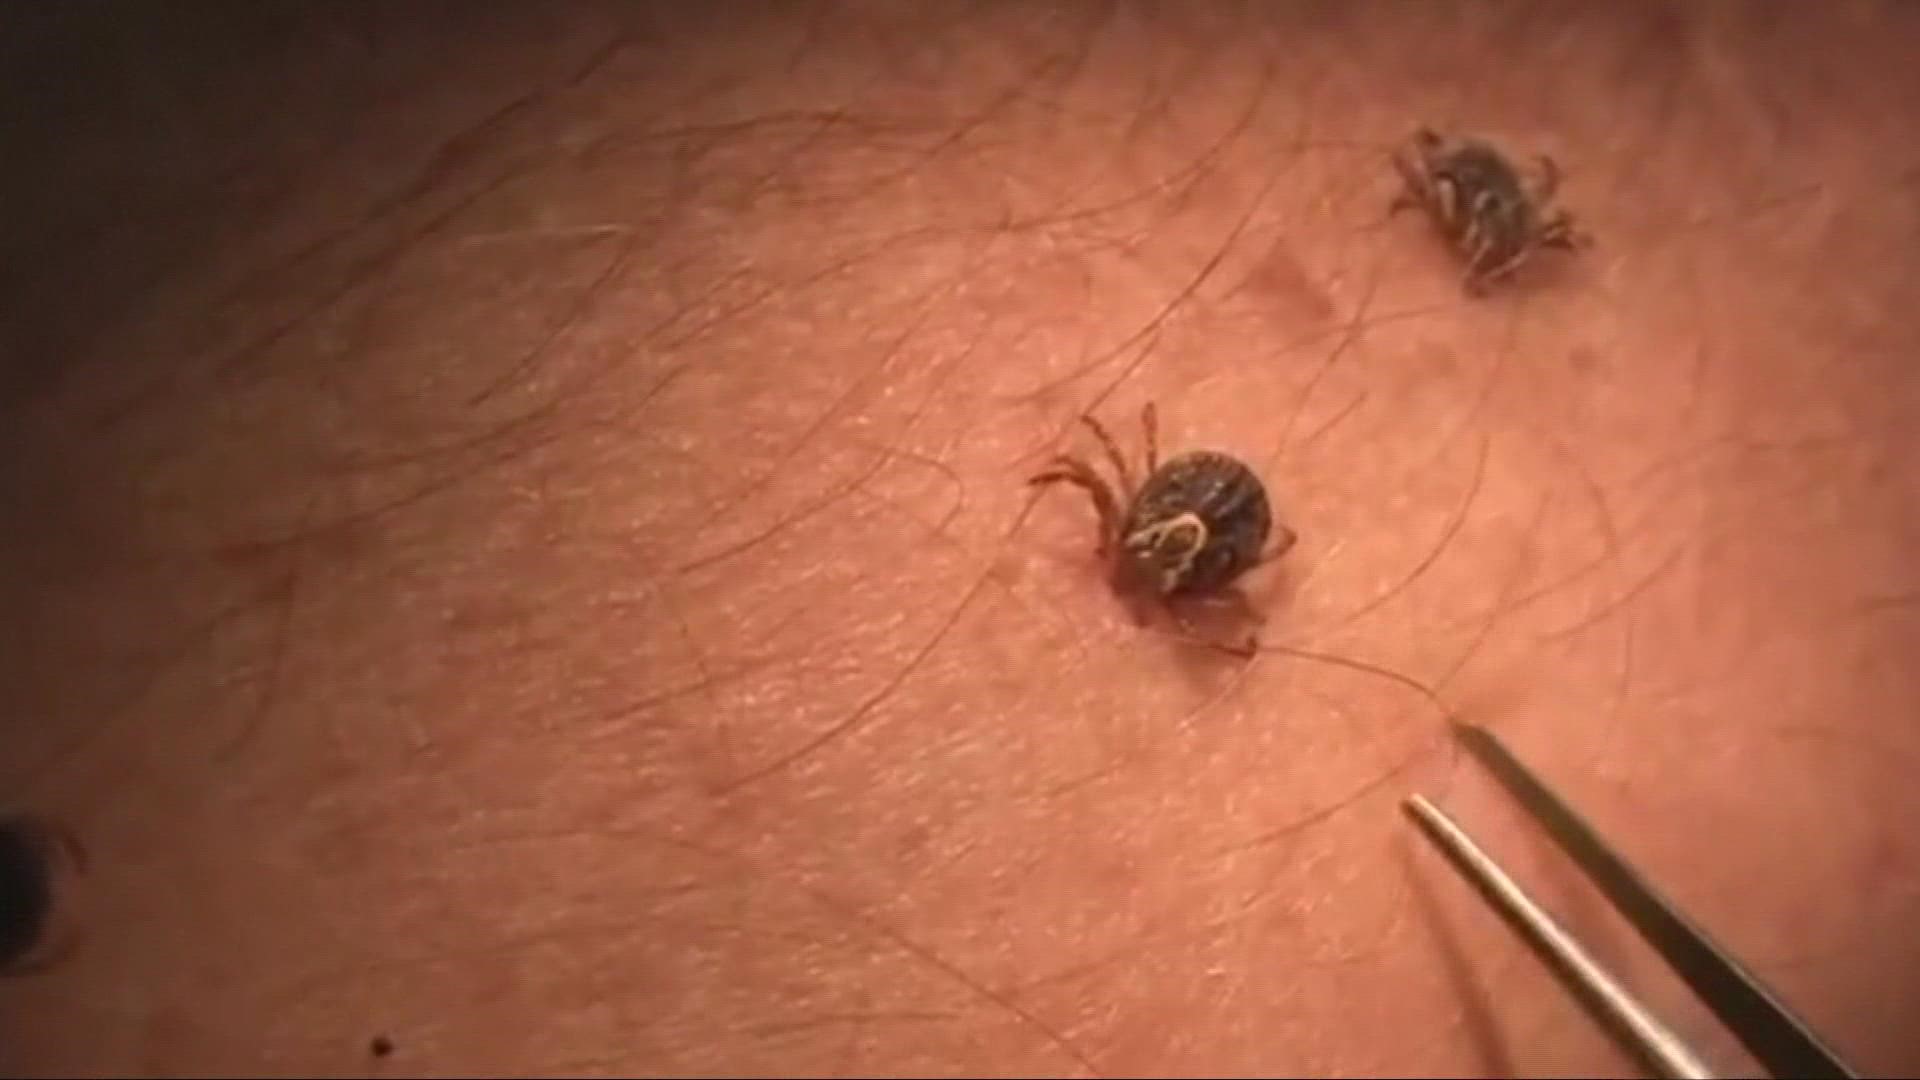 Here's everything you need to know about ticks in Ohio.